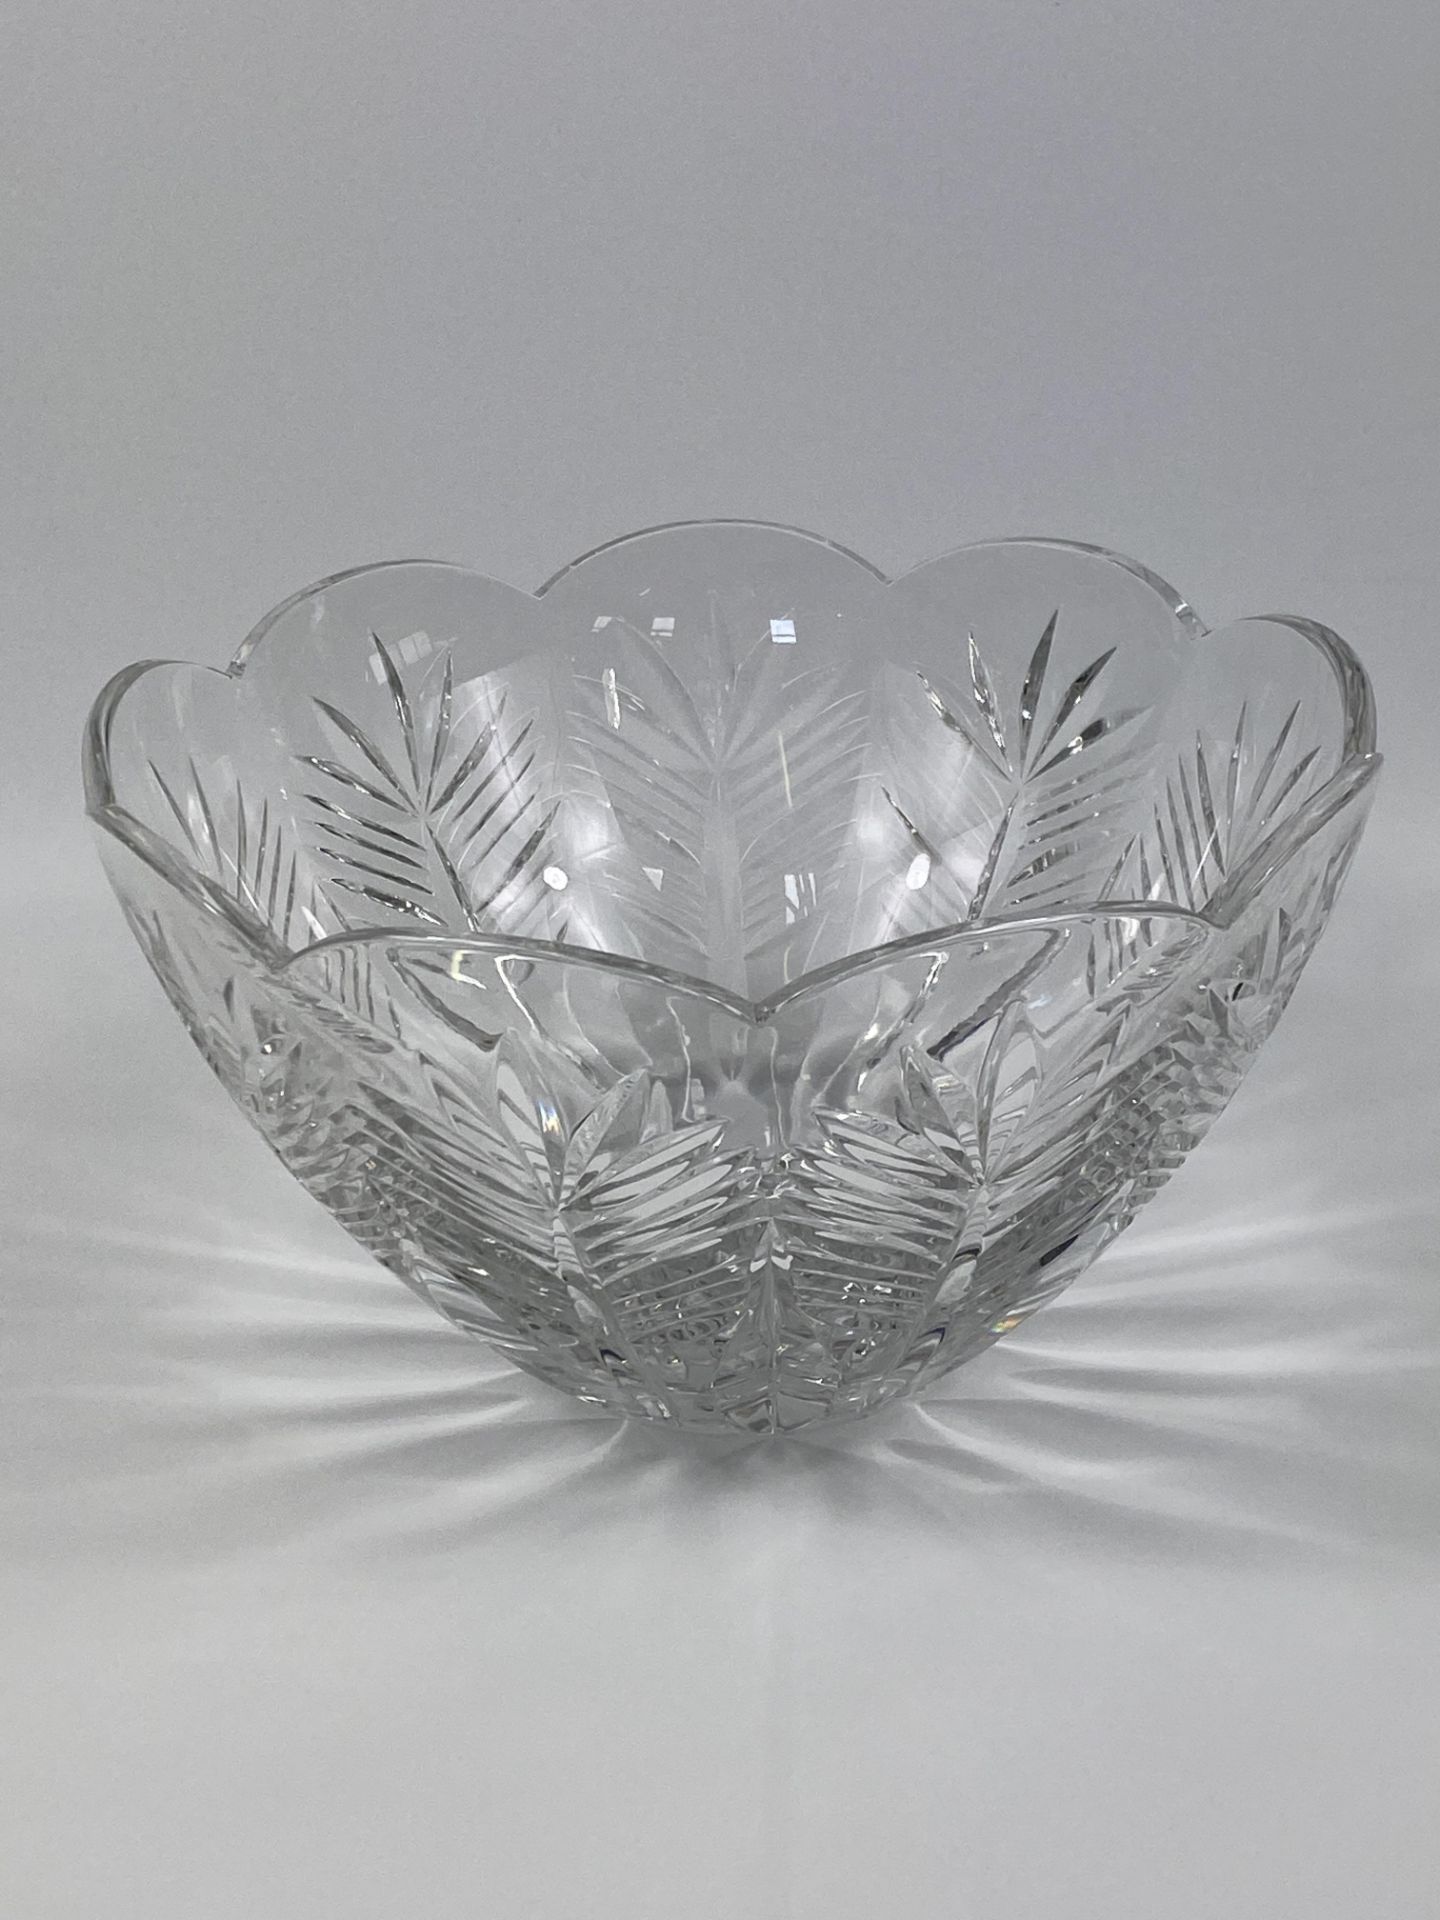 Waterford crystal glass bowl - Image 2 of 6